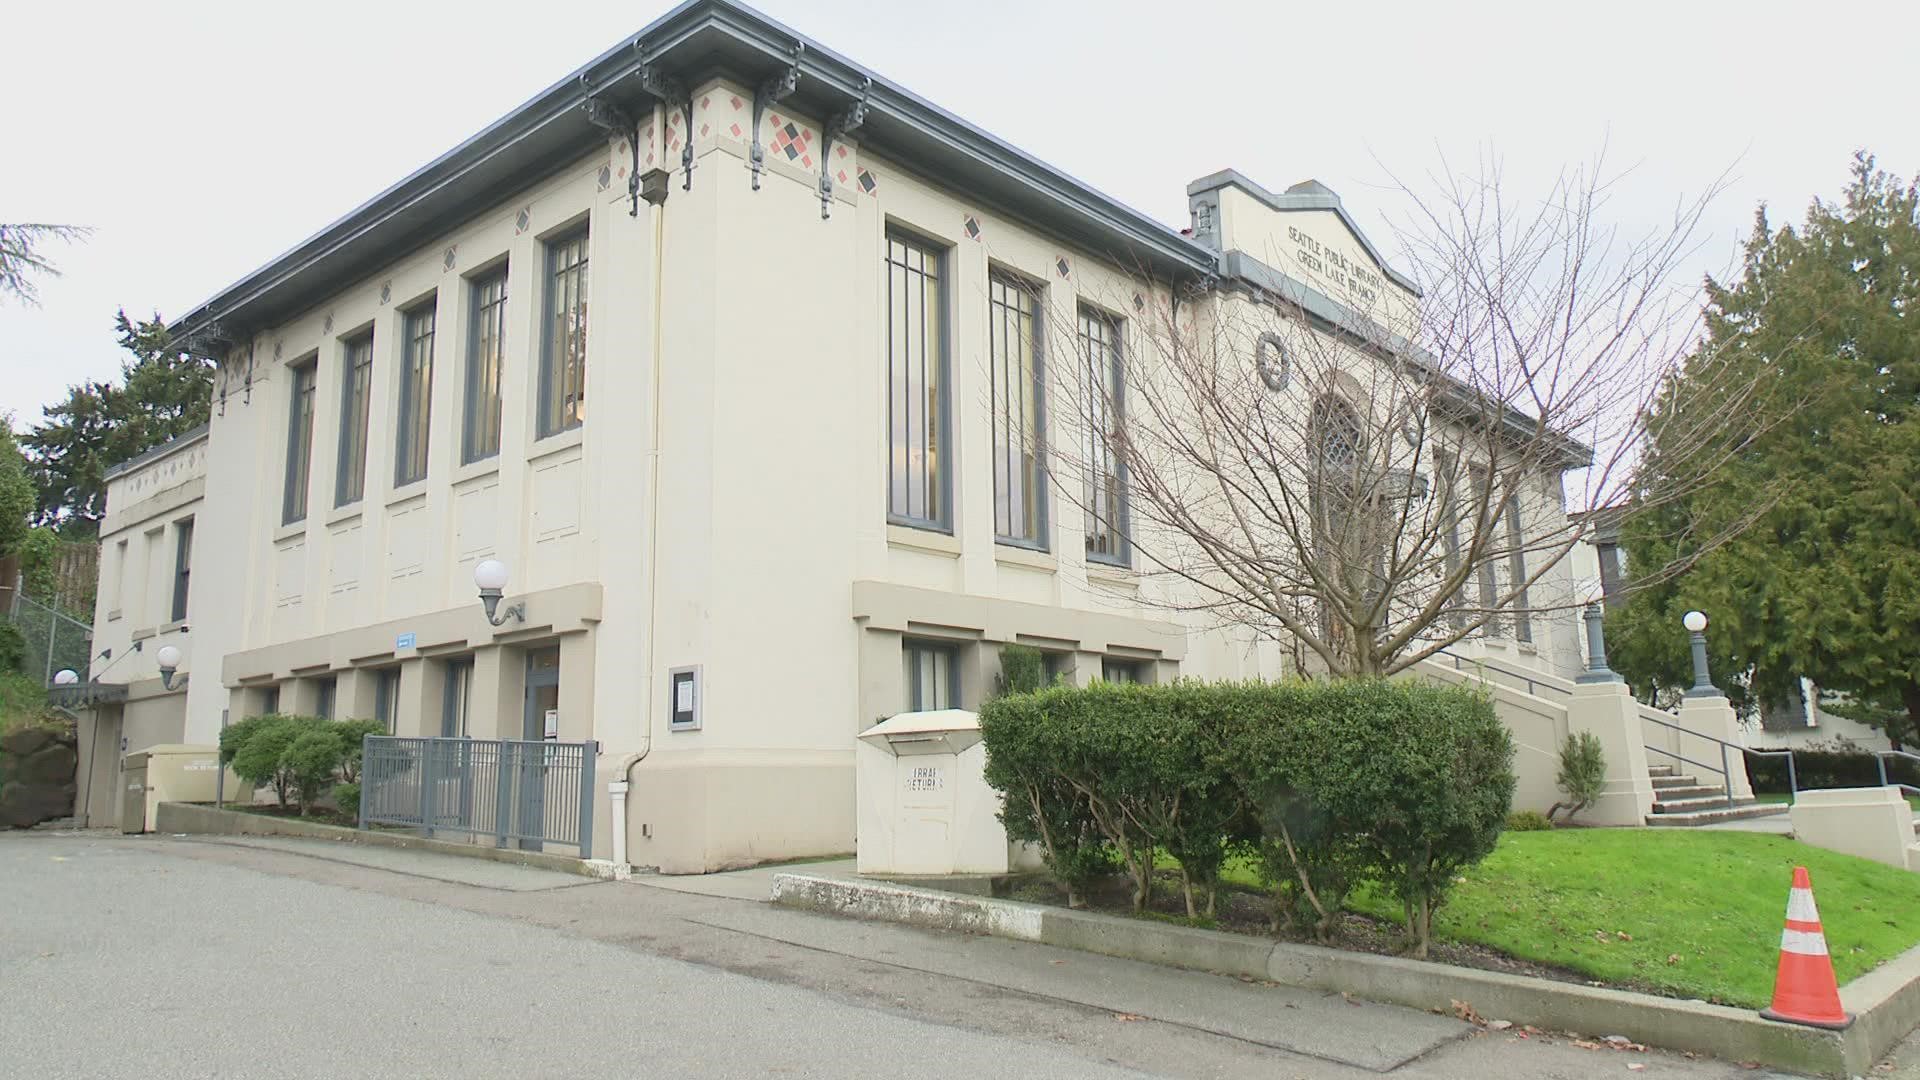 A survey by the city's Department of Construction identified the Green Lake Branch, one of three historic Carnegie buildings.